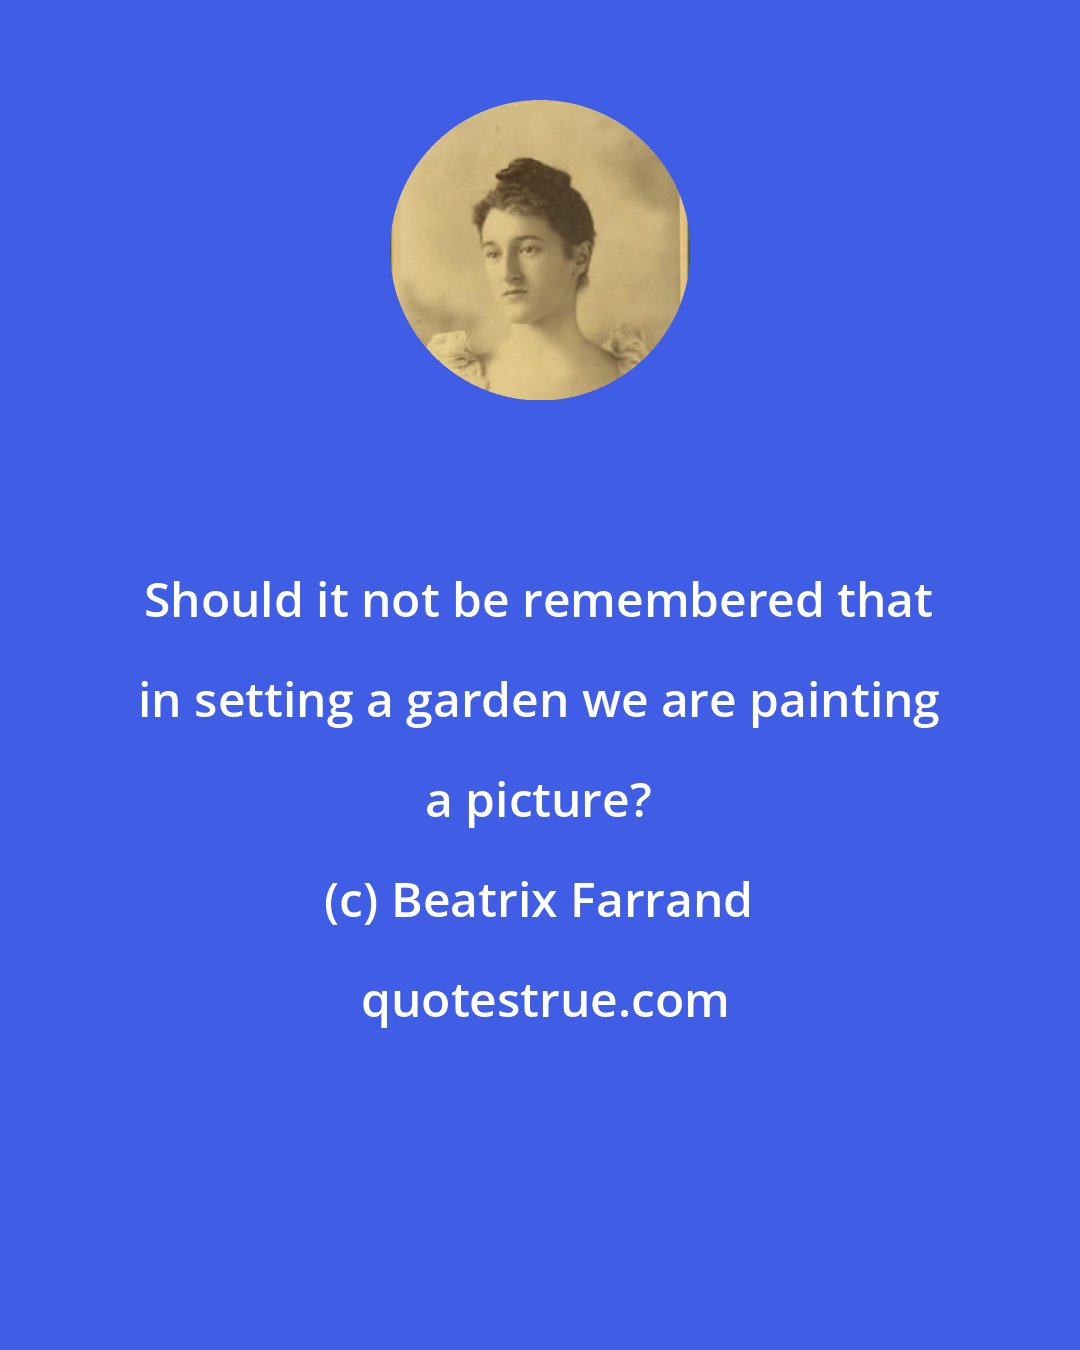 Beatrix Farrand: Should it not be remembered that in setting a garden we are painting a picture?